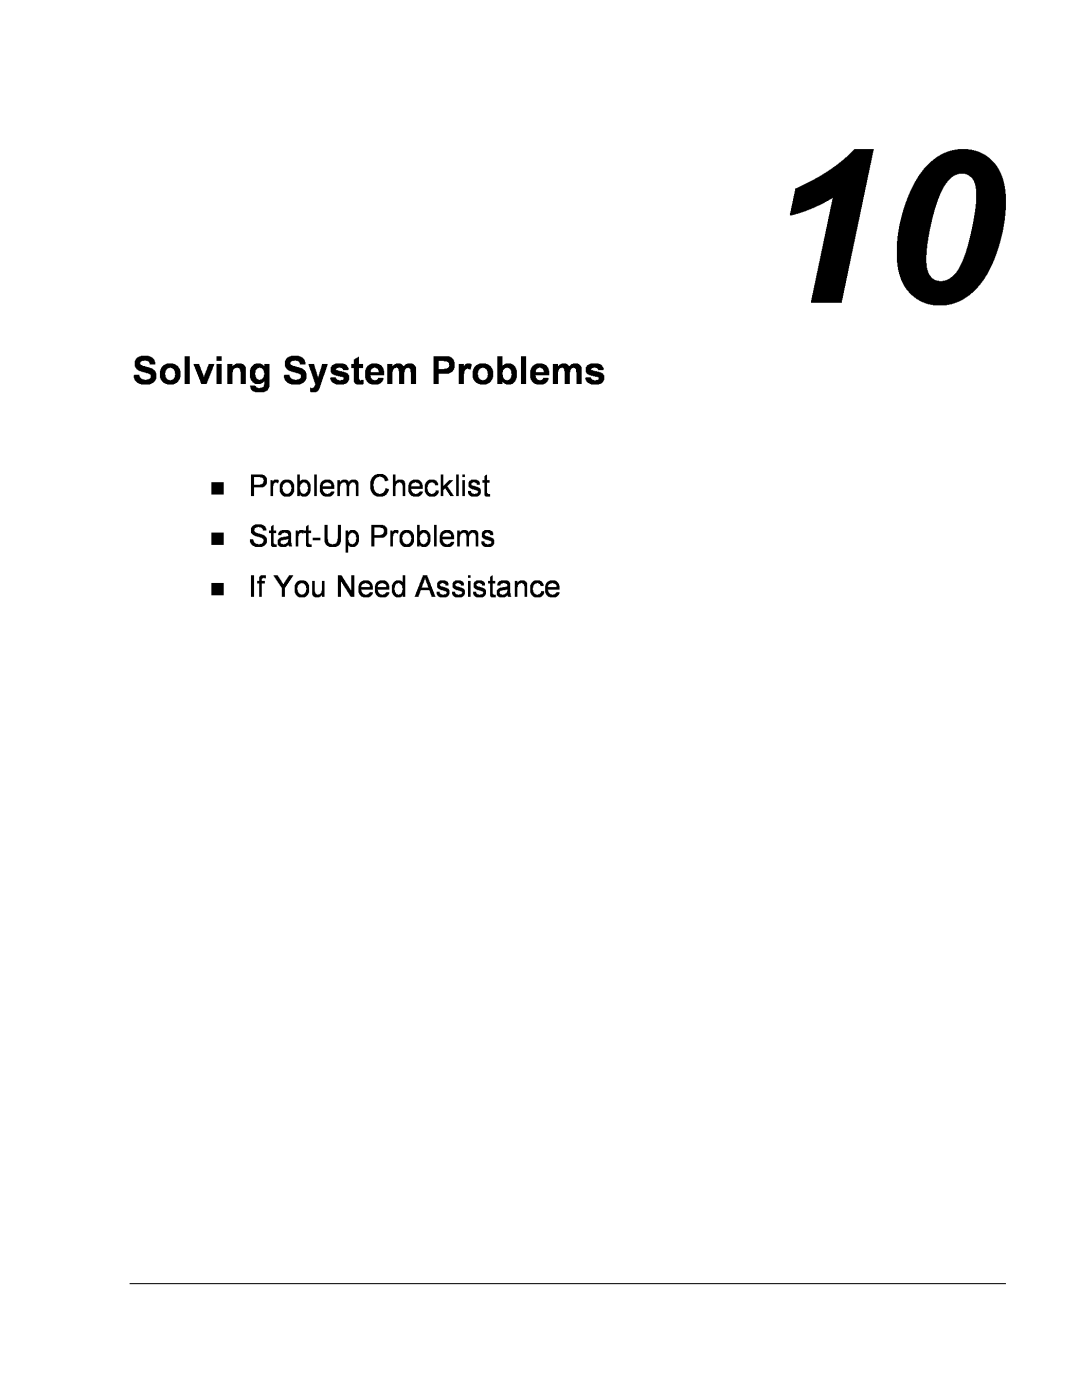 NEC Versa Series manual Solving System Problems, Problem Checklist Start-Up Problems If You Need Assistance 